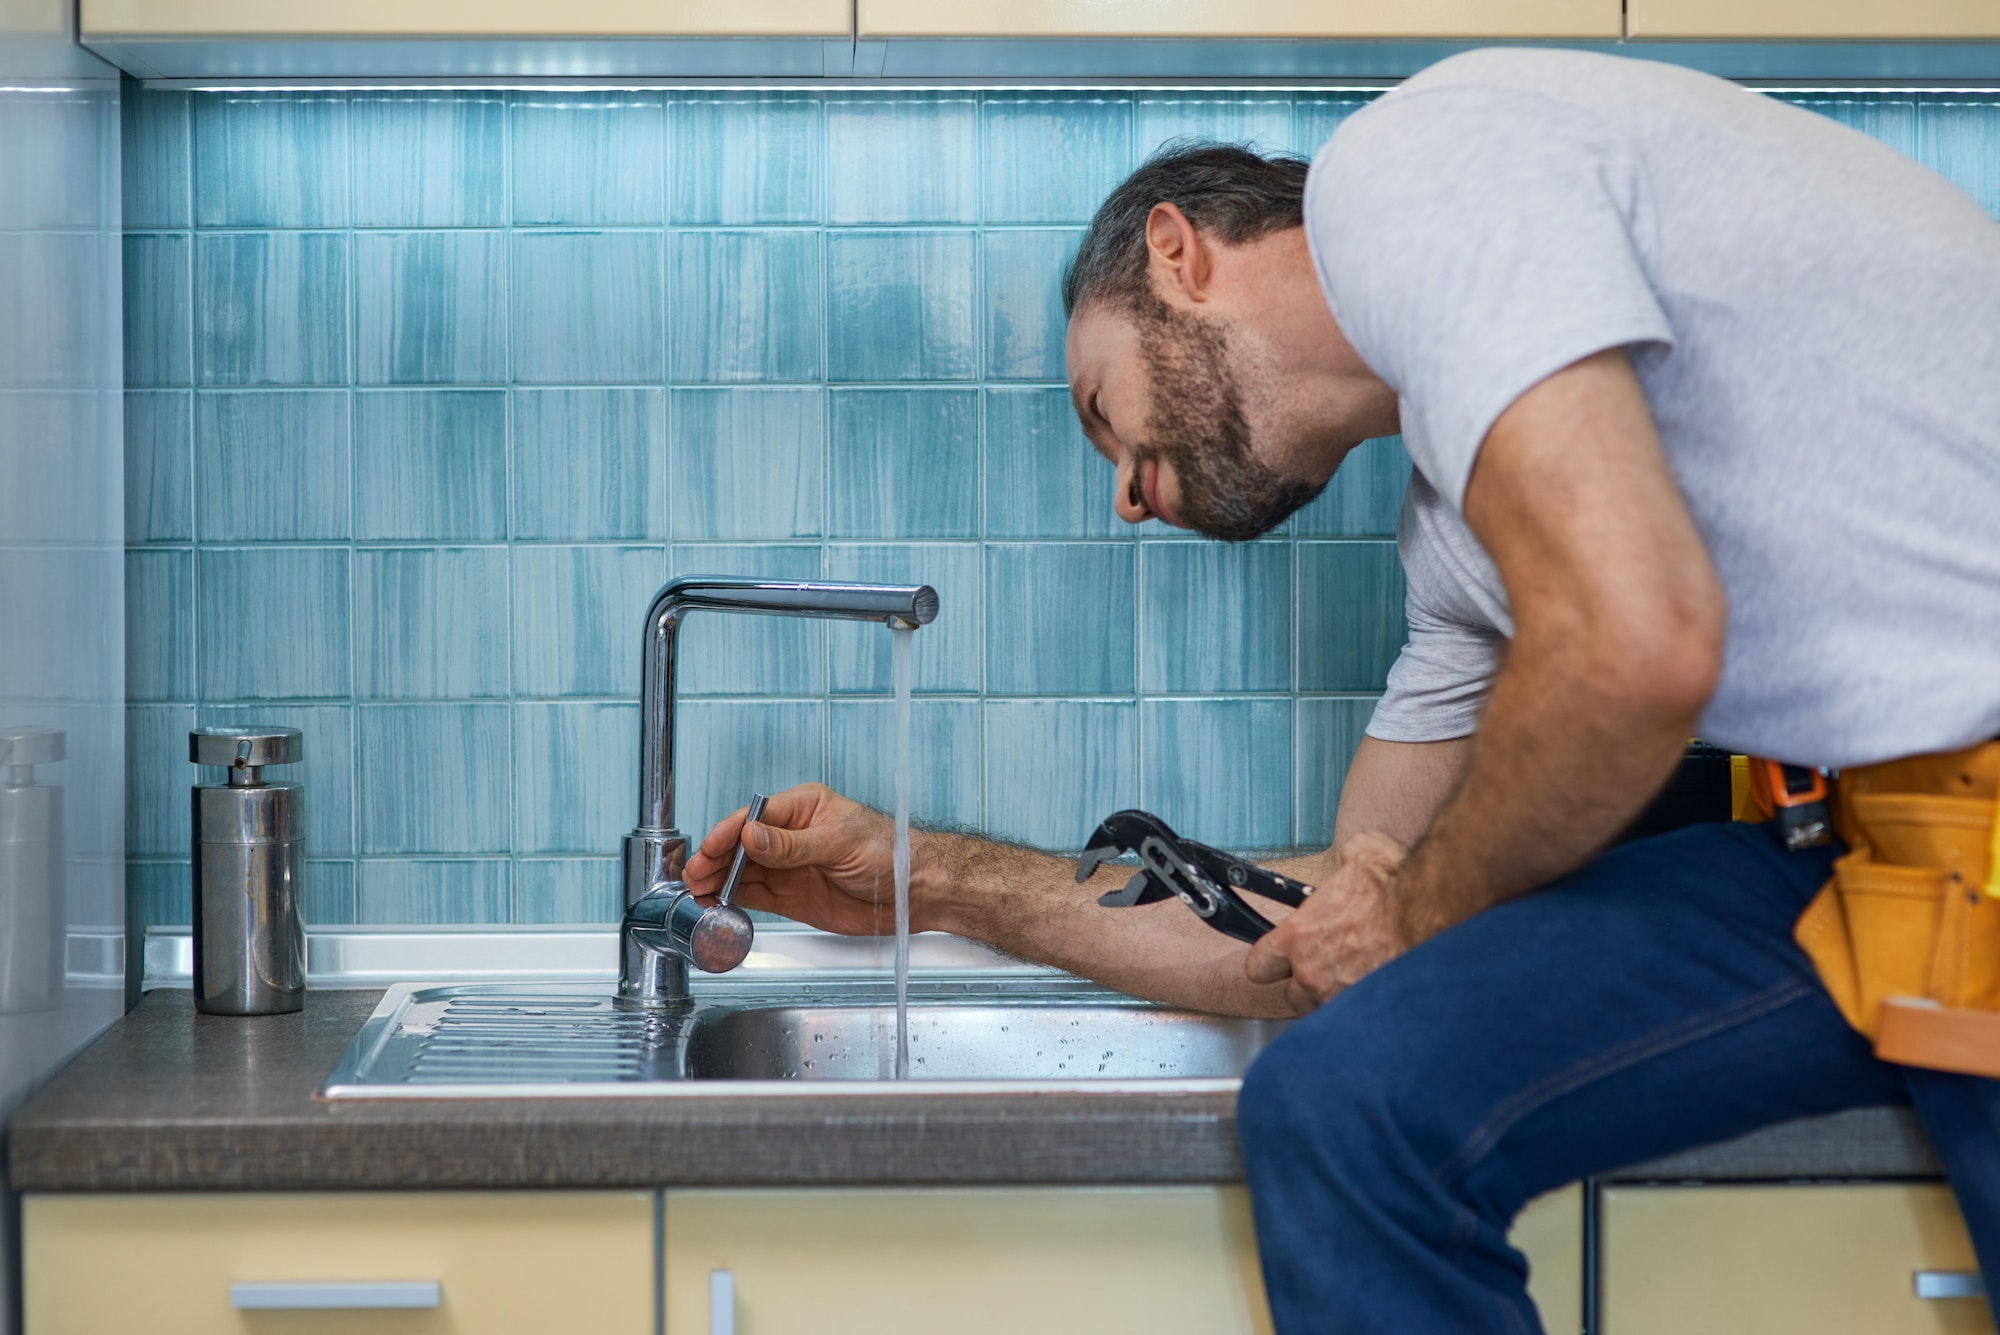 Professional plumber looking concentrated, using pipe wrench while examining and fixing faucet in